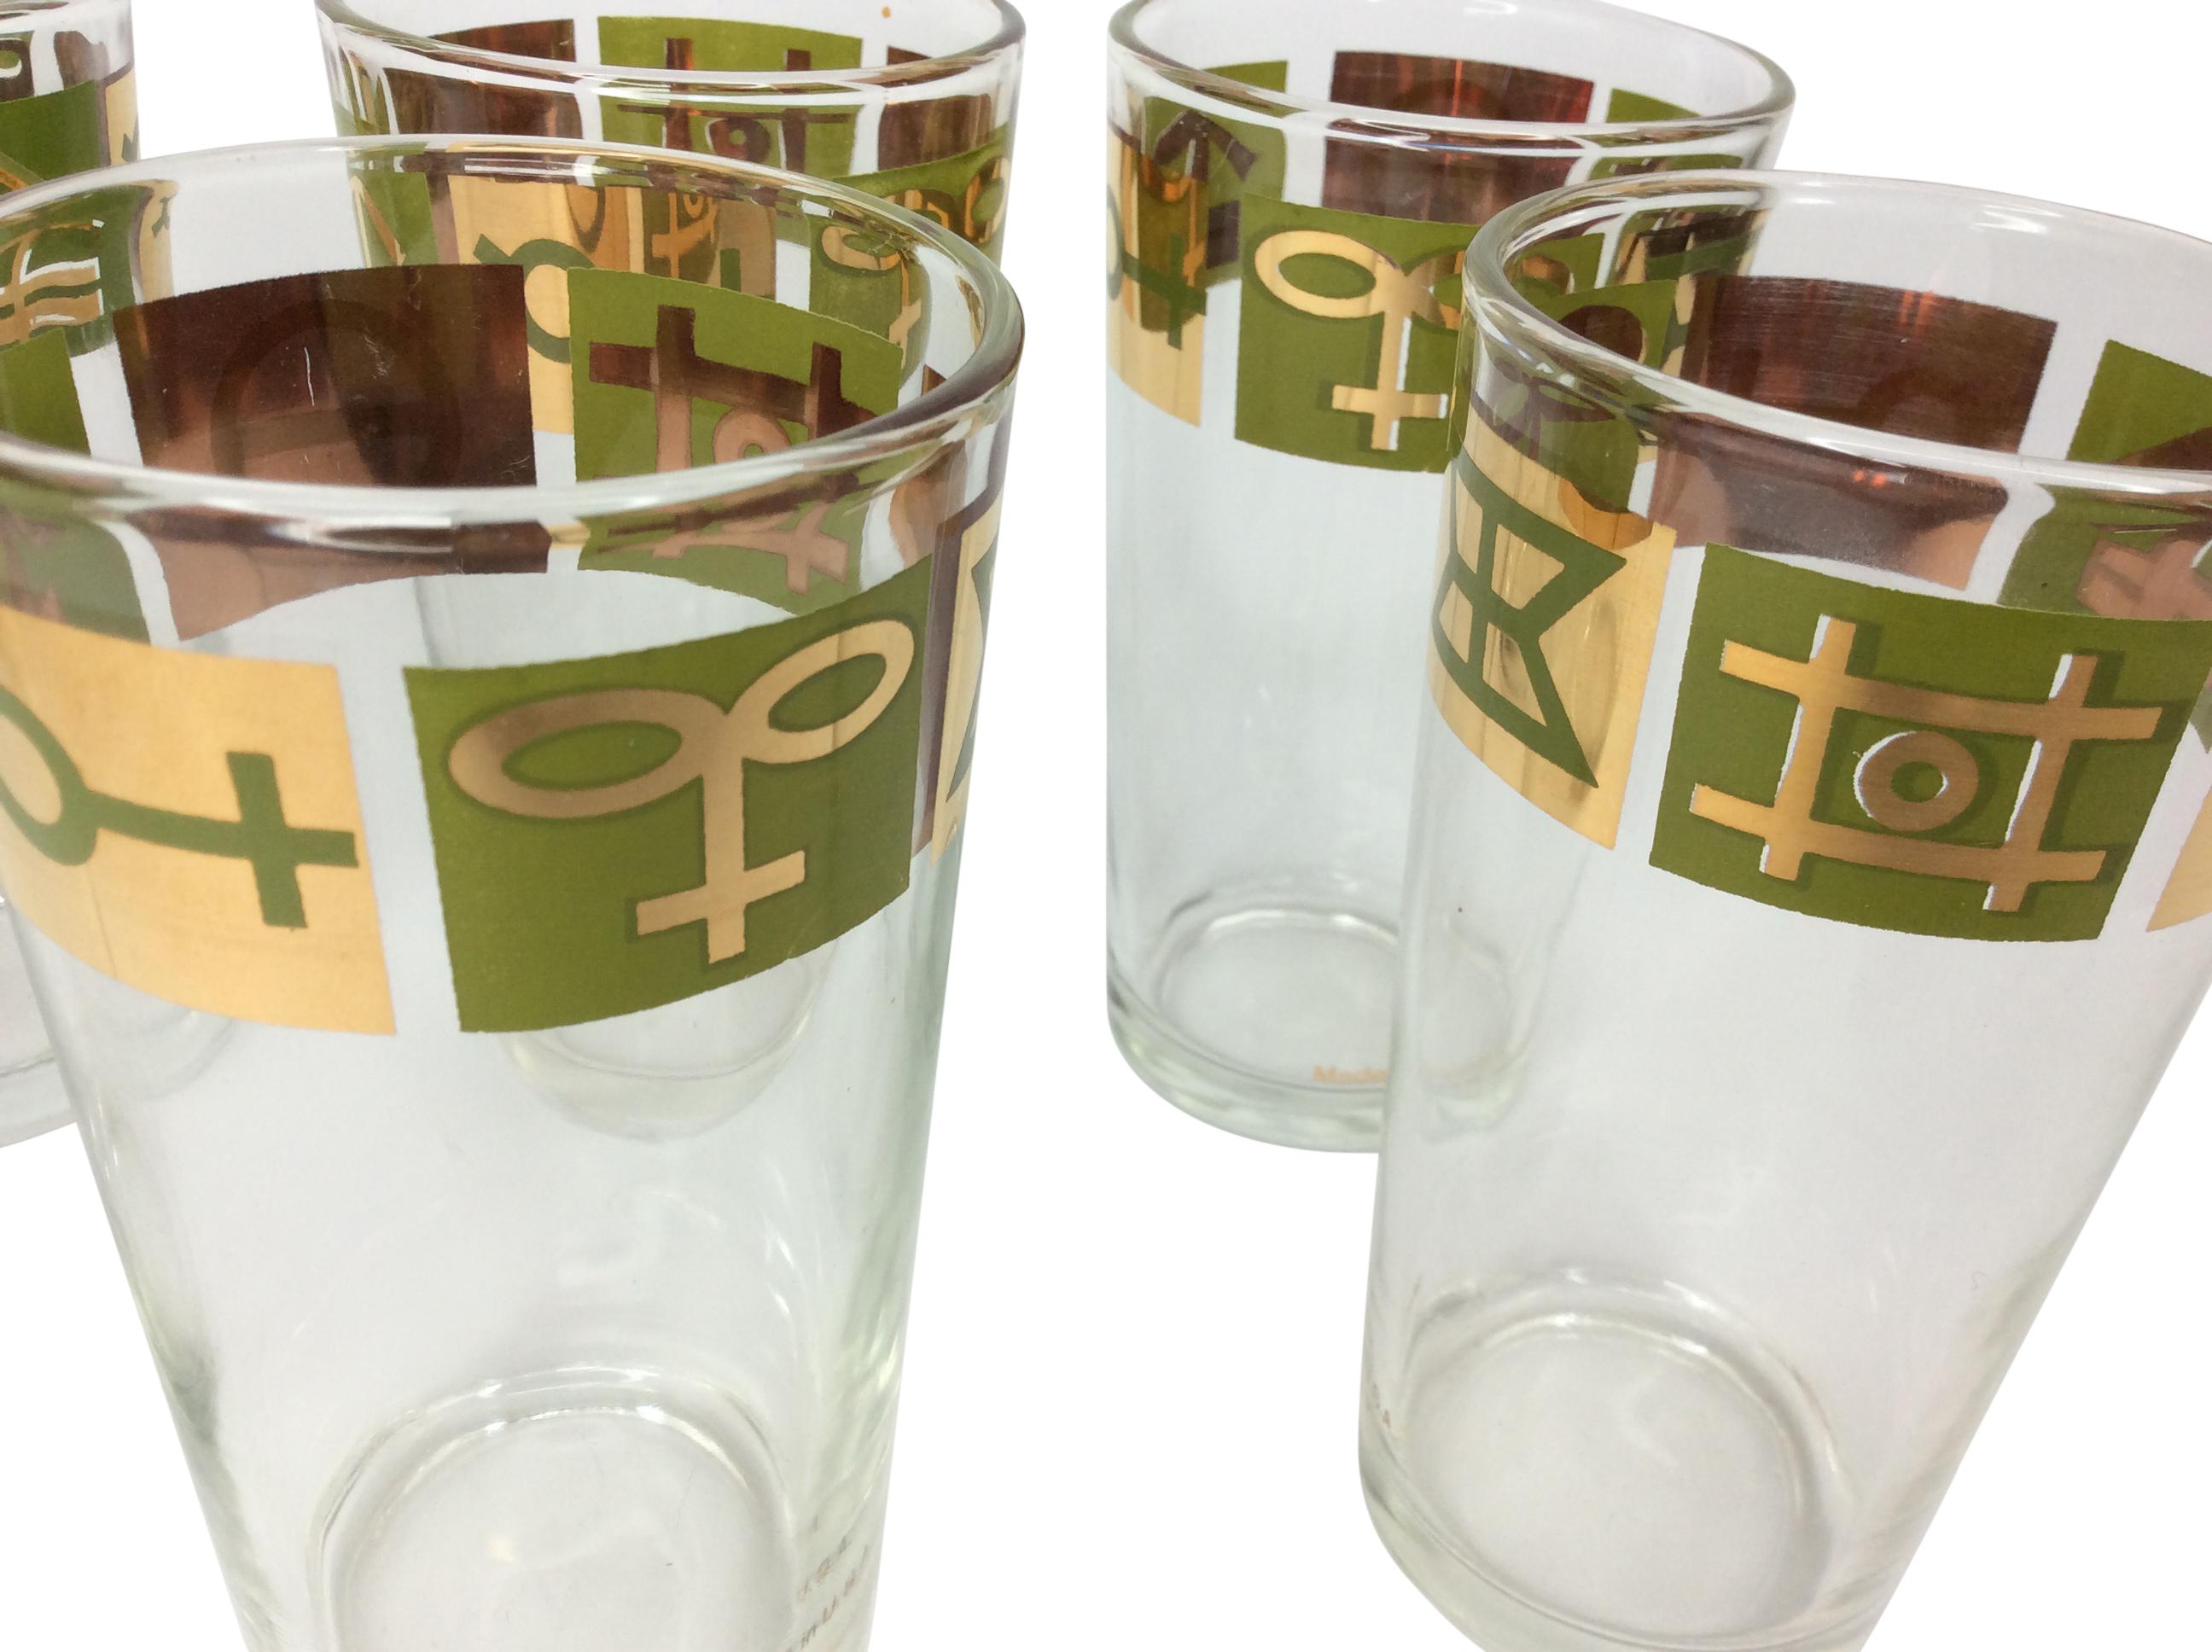 Set of 6 Vintage Highball Glasses With Stylized Egyptian Hieroglyphics Design. Signed made in USA. All in excellent vintage condition.